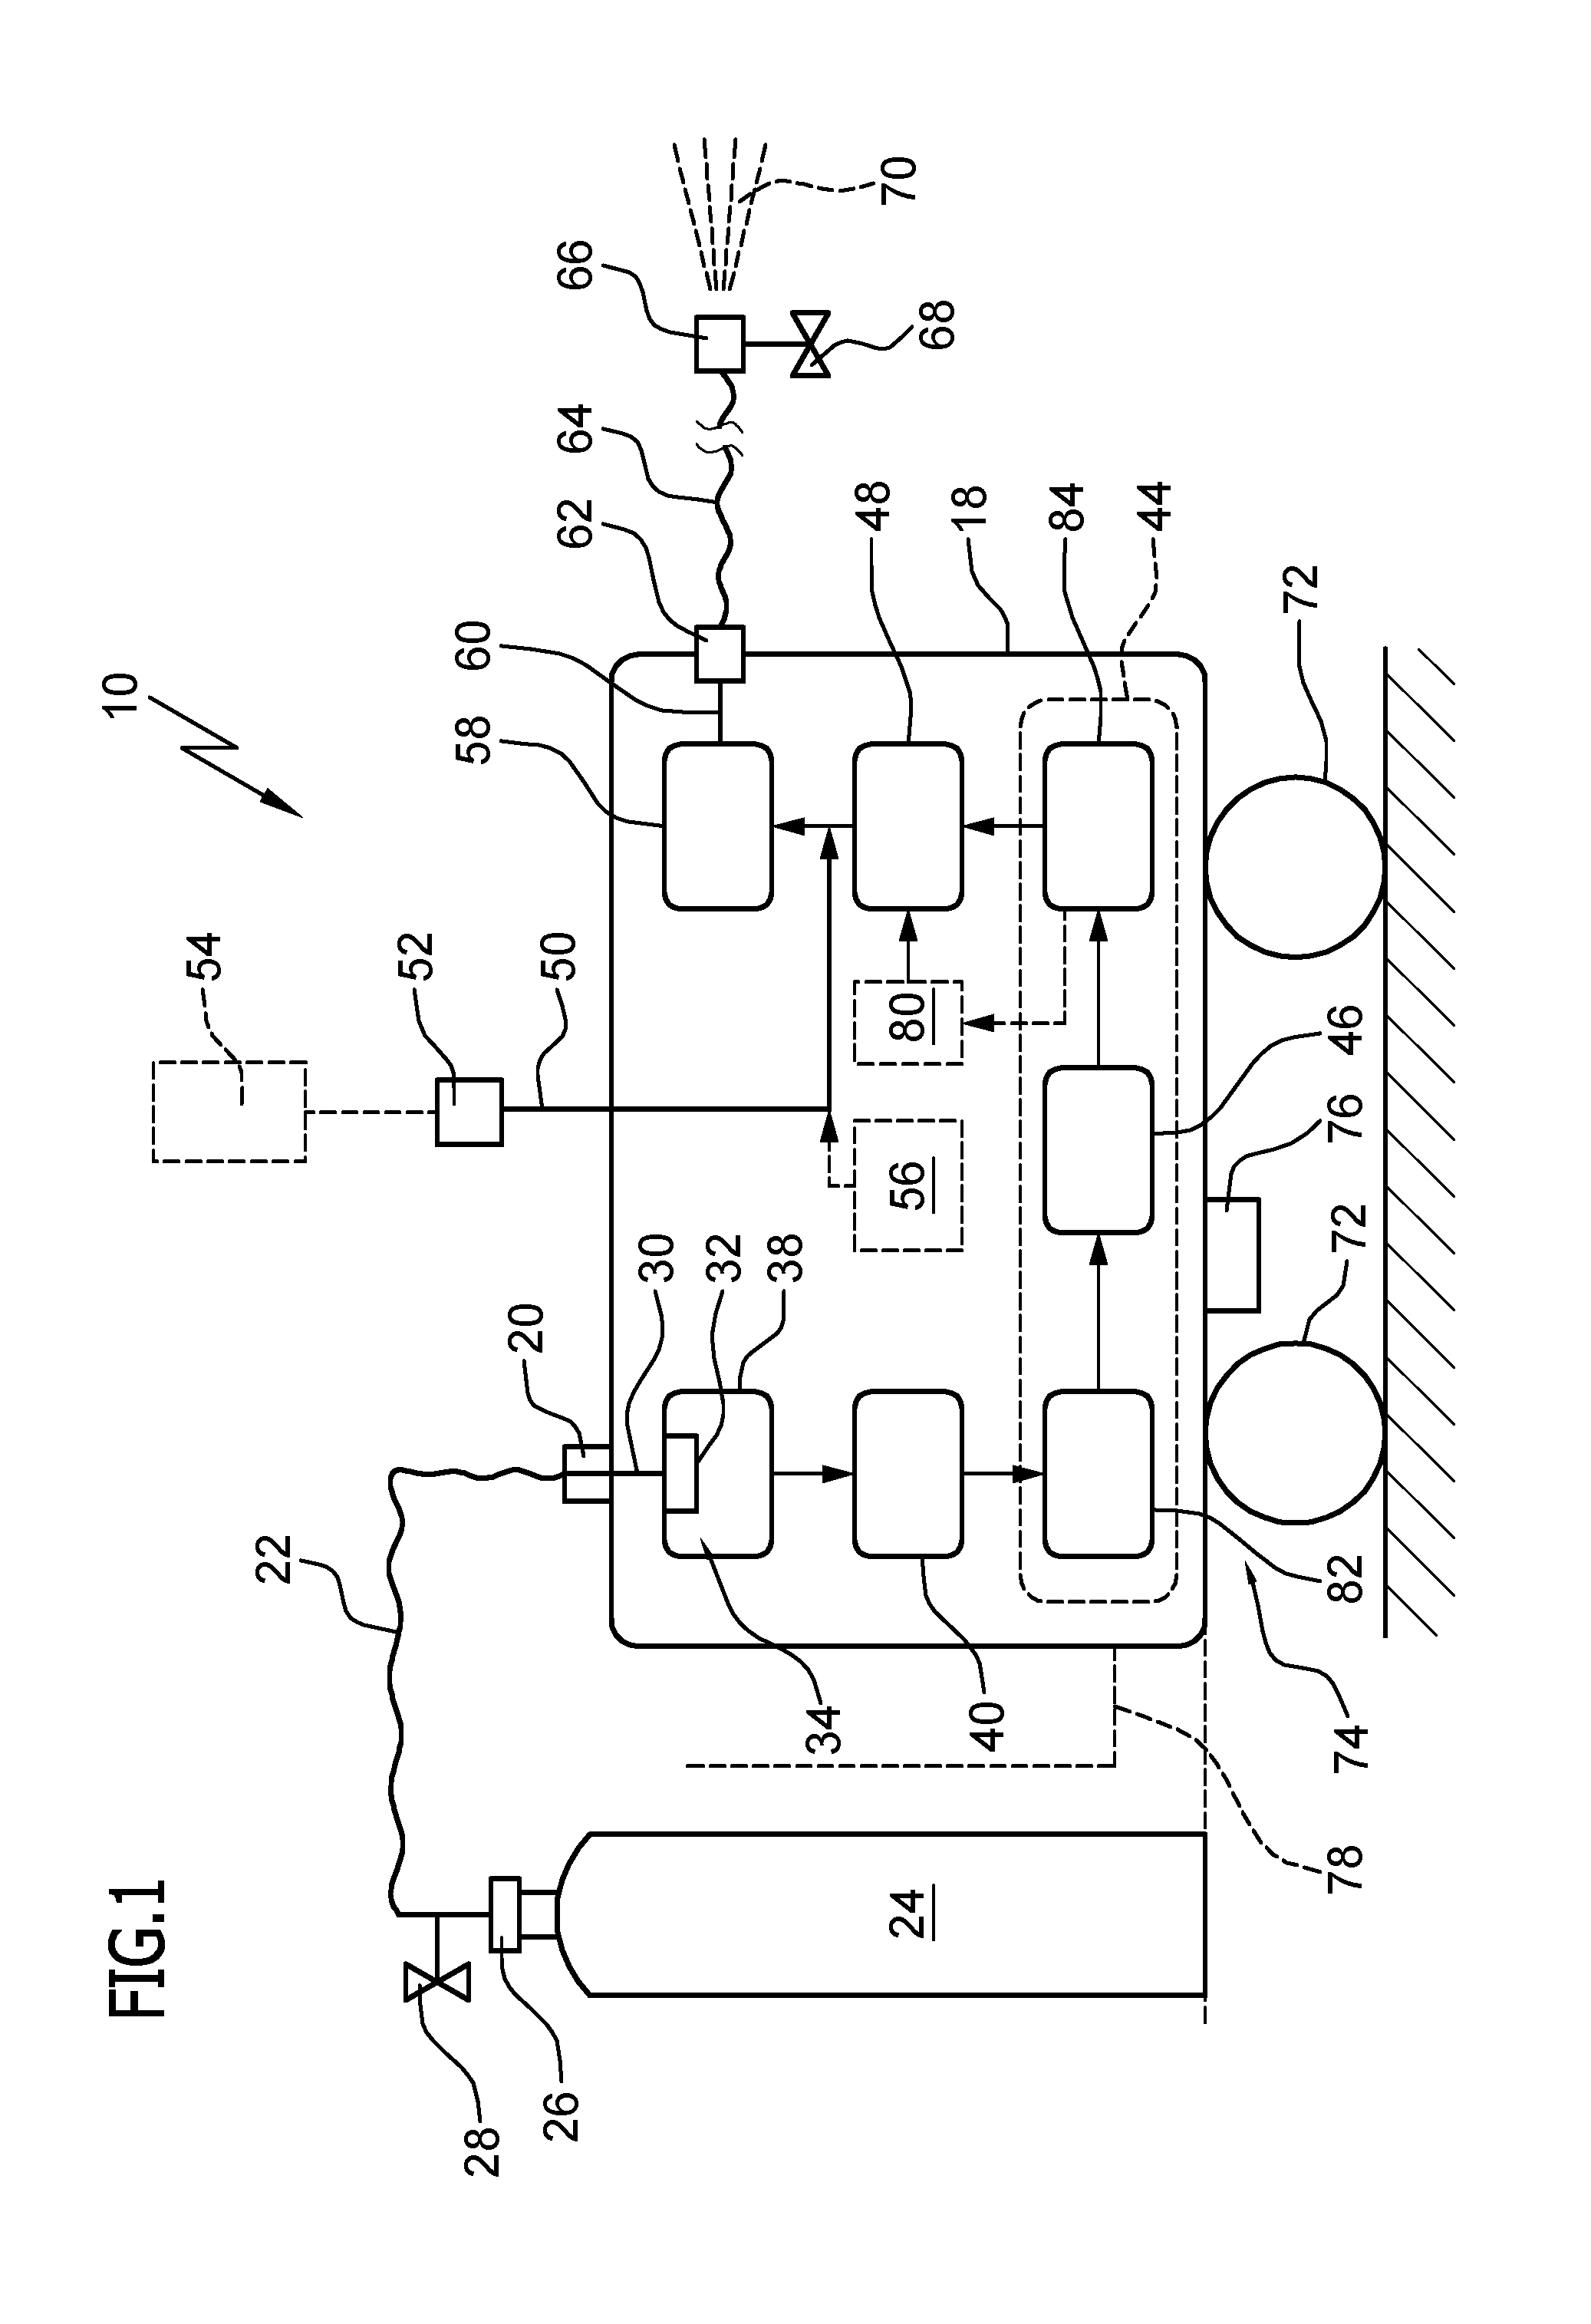 Apparatus for producing co2 pellets from co2 snow and cleaning device